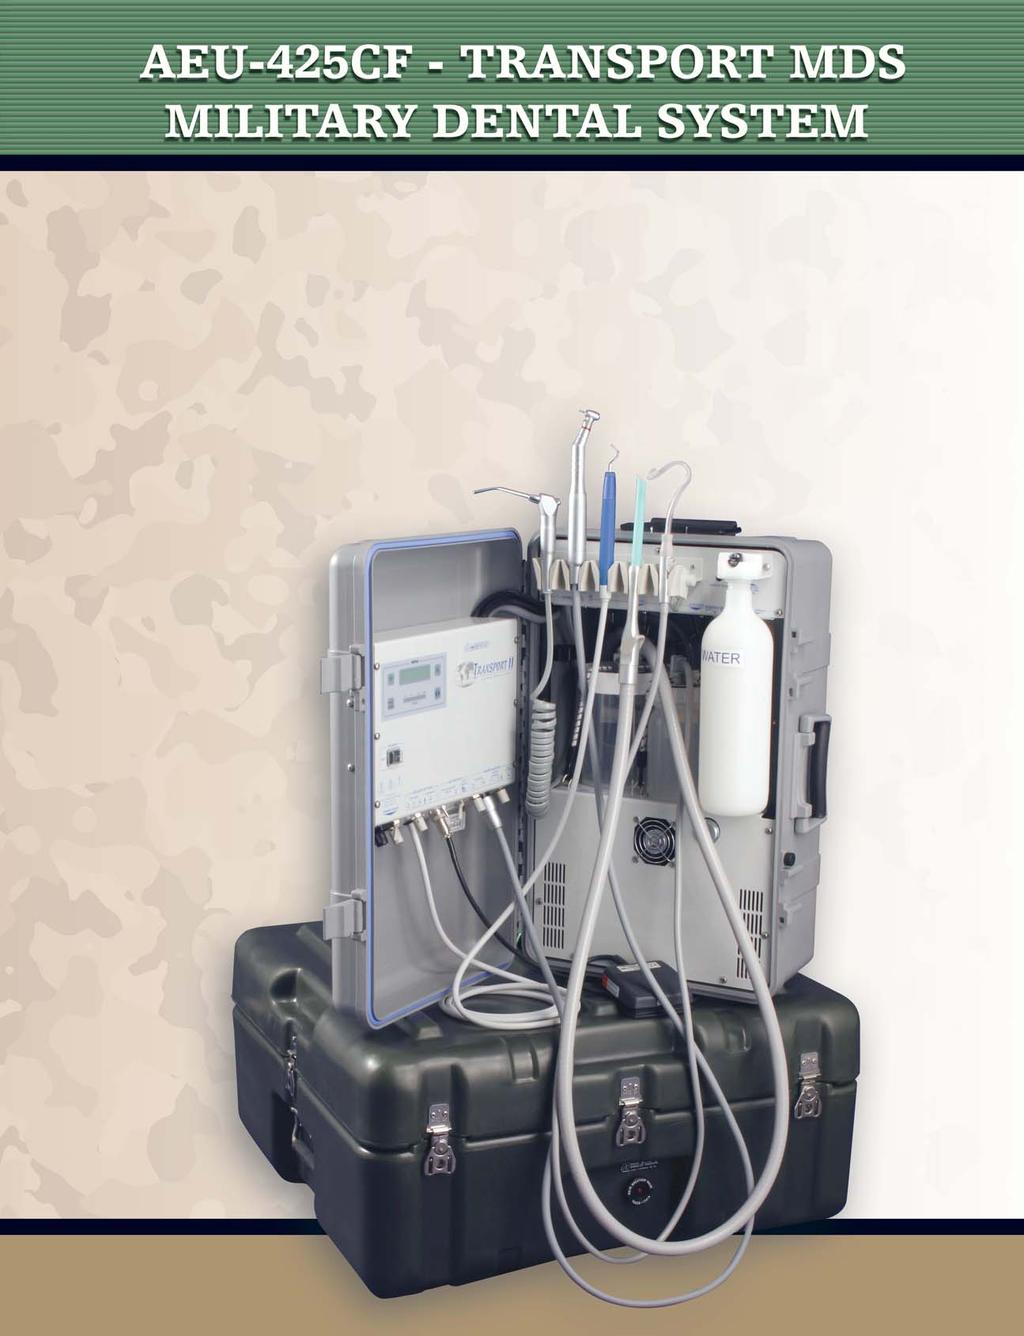 Aseptico s full-featured Transport MDS Electric Military Field Dental System is a result of years of analysis, design, engineering and testing.